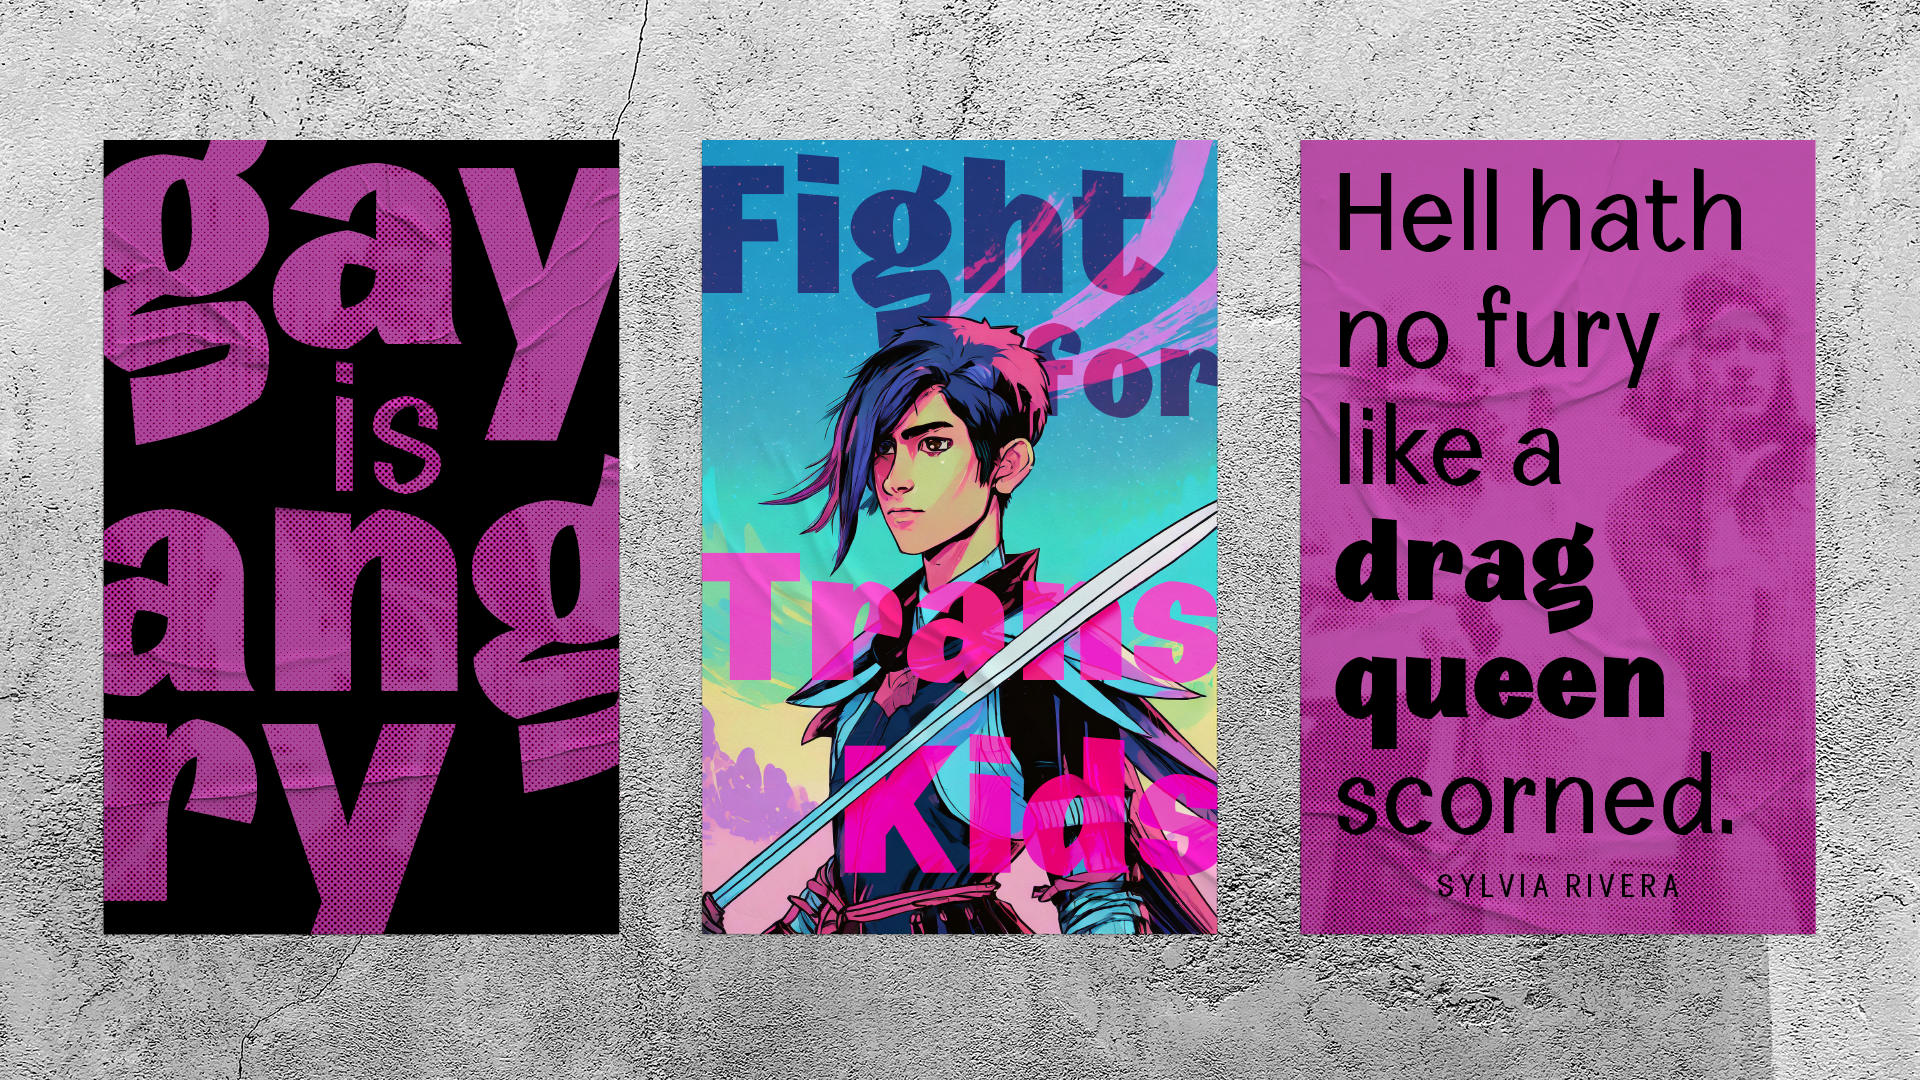 Three poster mockups: "gay is angry", "Fight for Trans Kids", "Hell hath no fury like a drag queen scorned. —Sylvia Rivera".